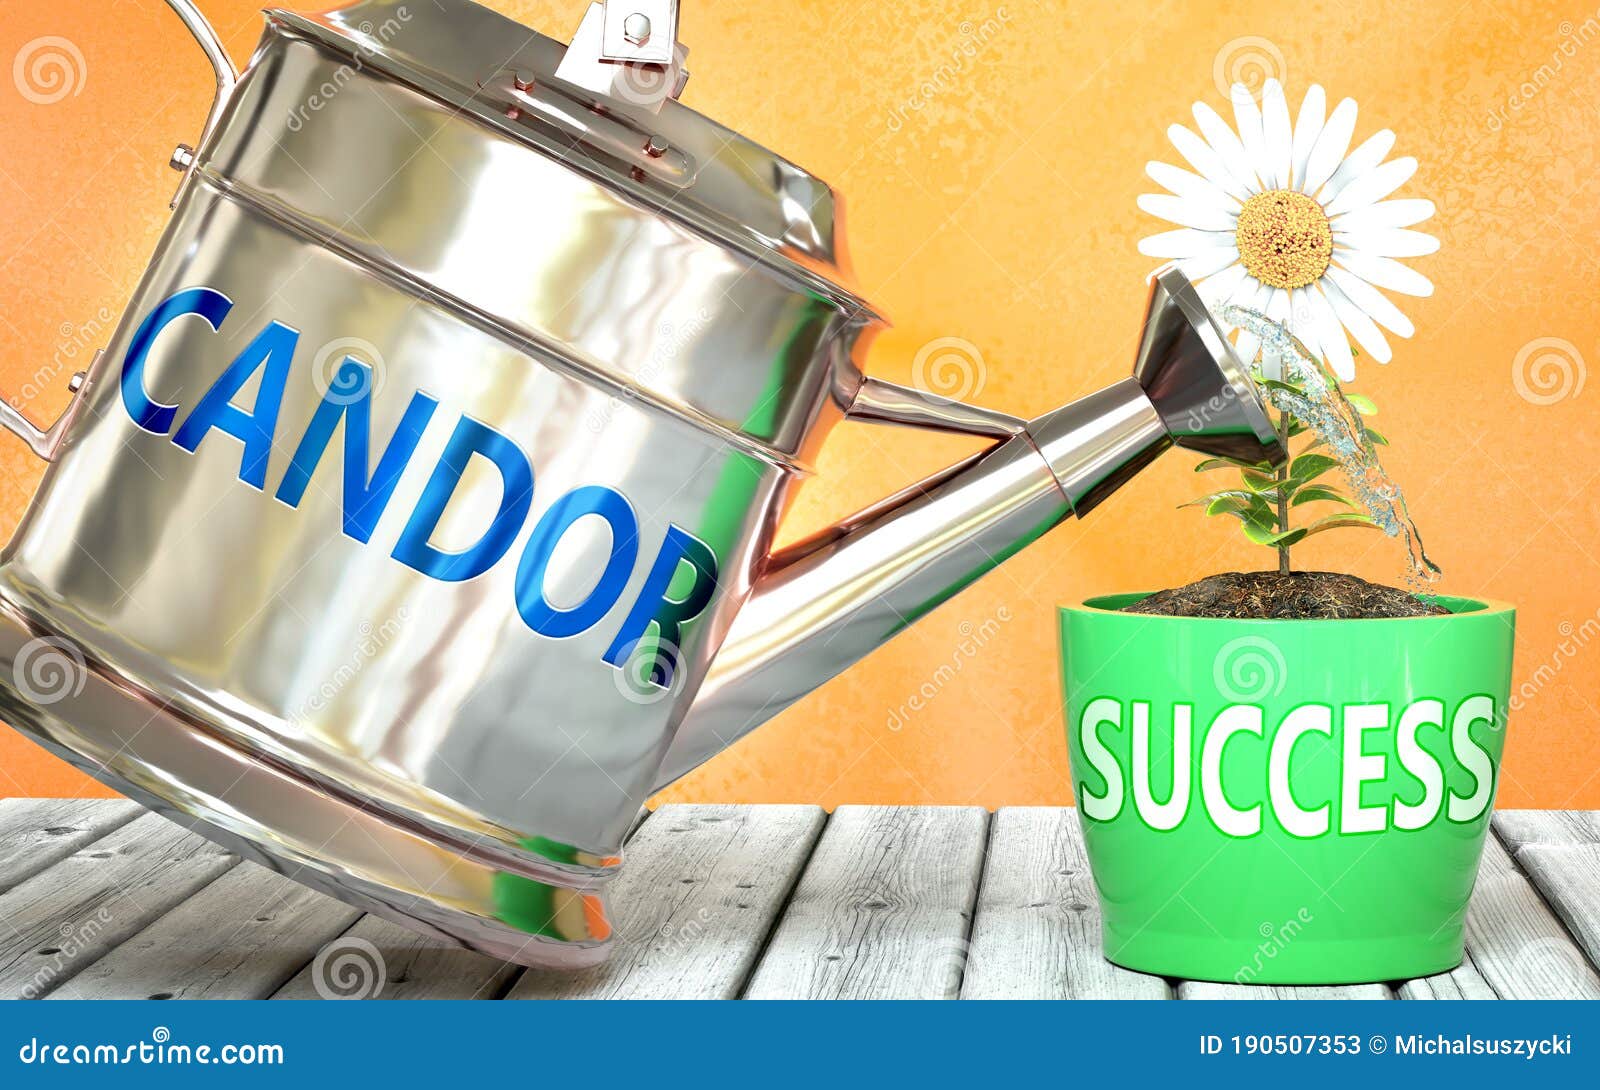 candor helps achieving success - pictured as word candor on a watering can to ize that candor makes success grow and it is